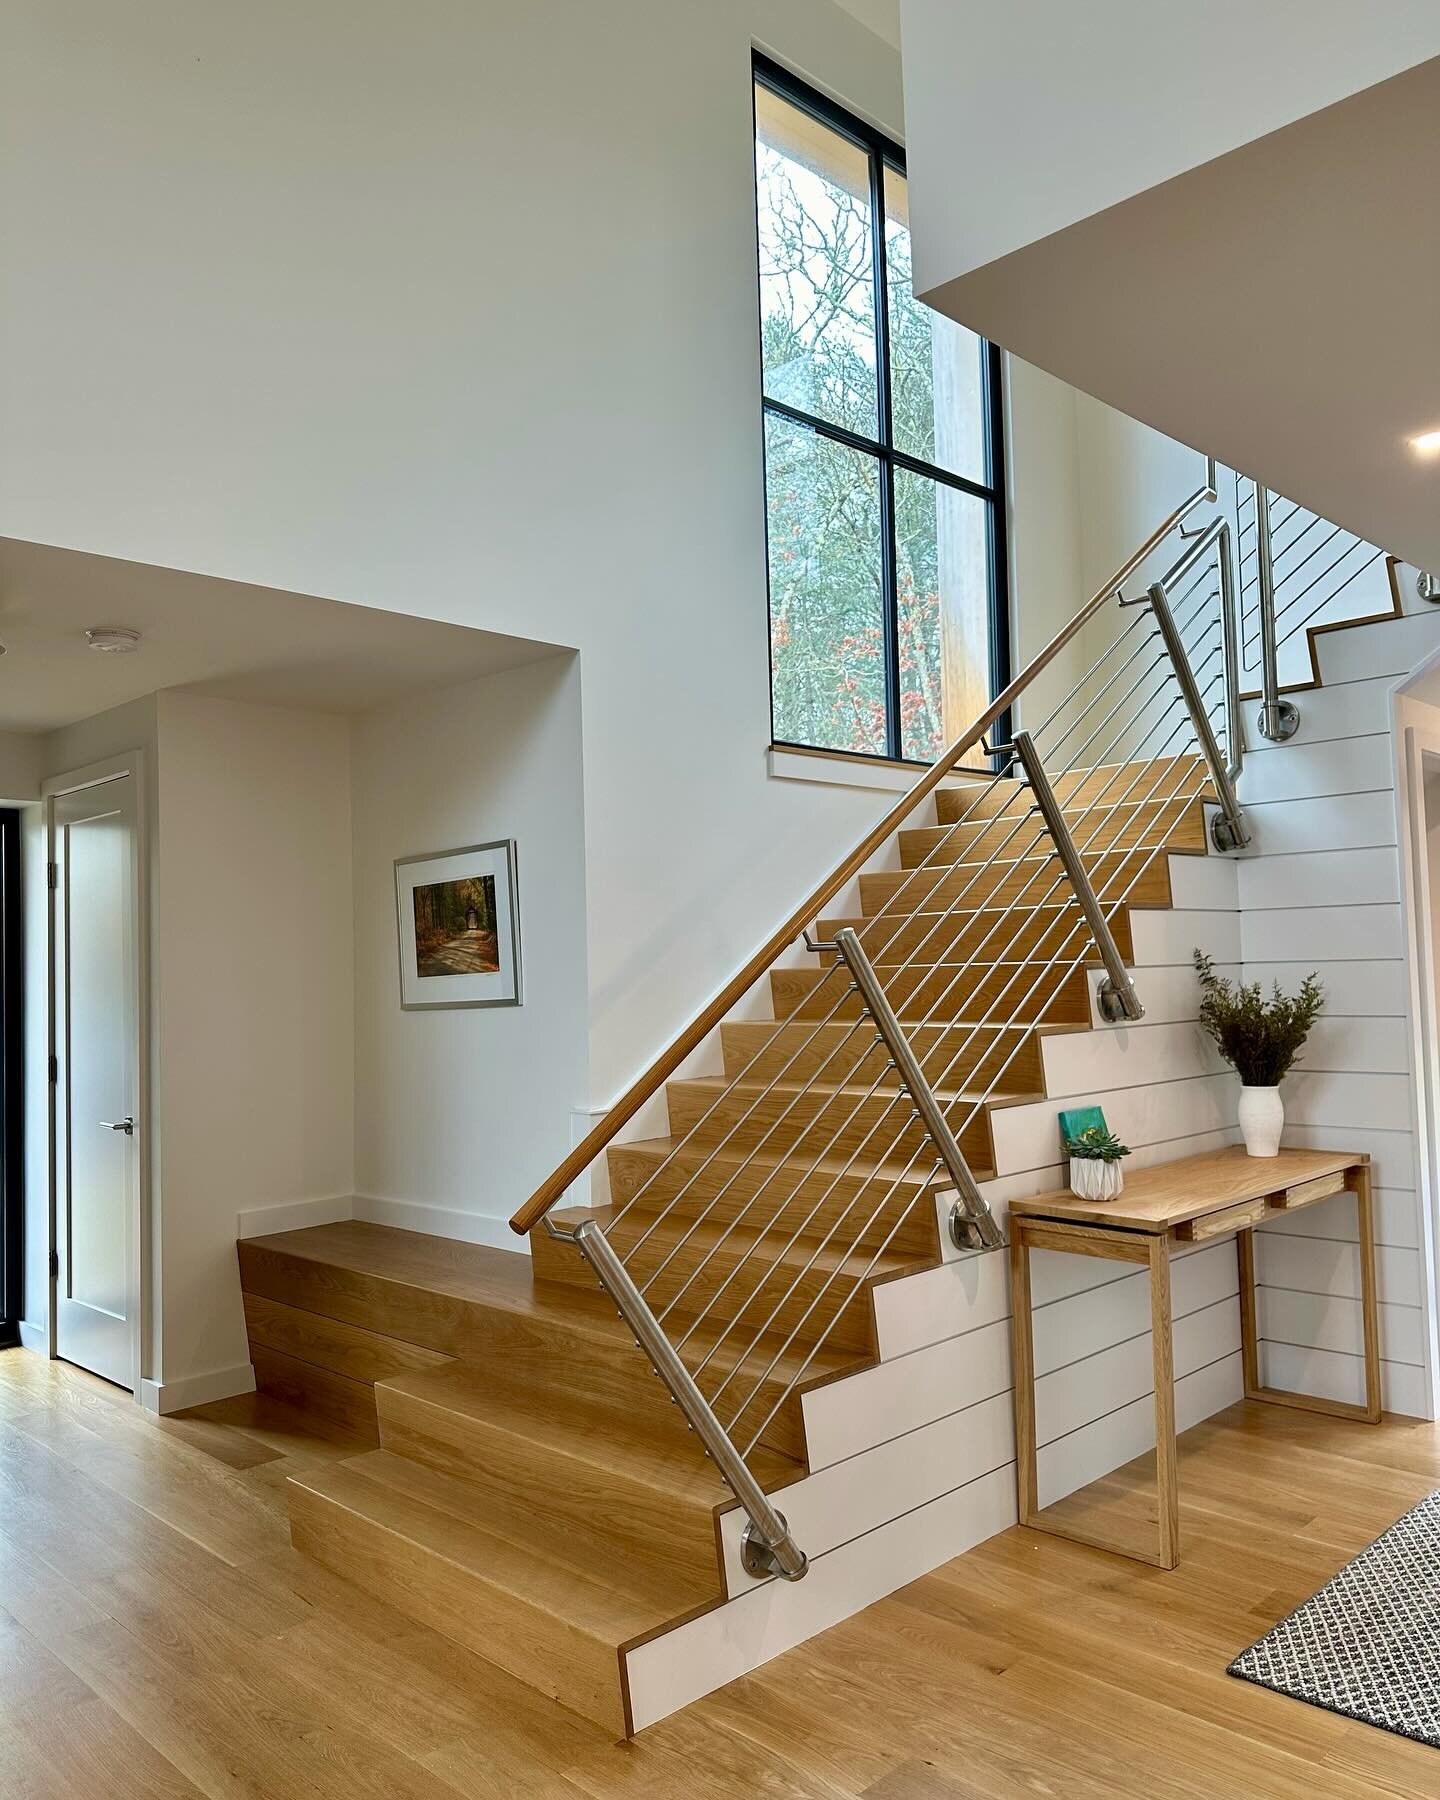 A nautical interpretation of a gangway influenced the design of this staircase. The staircase features a stainless steel railing system and a hardwood handrail. The incorporation of these materials provides strength and durability to the design. The 